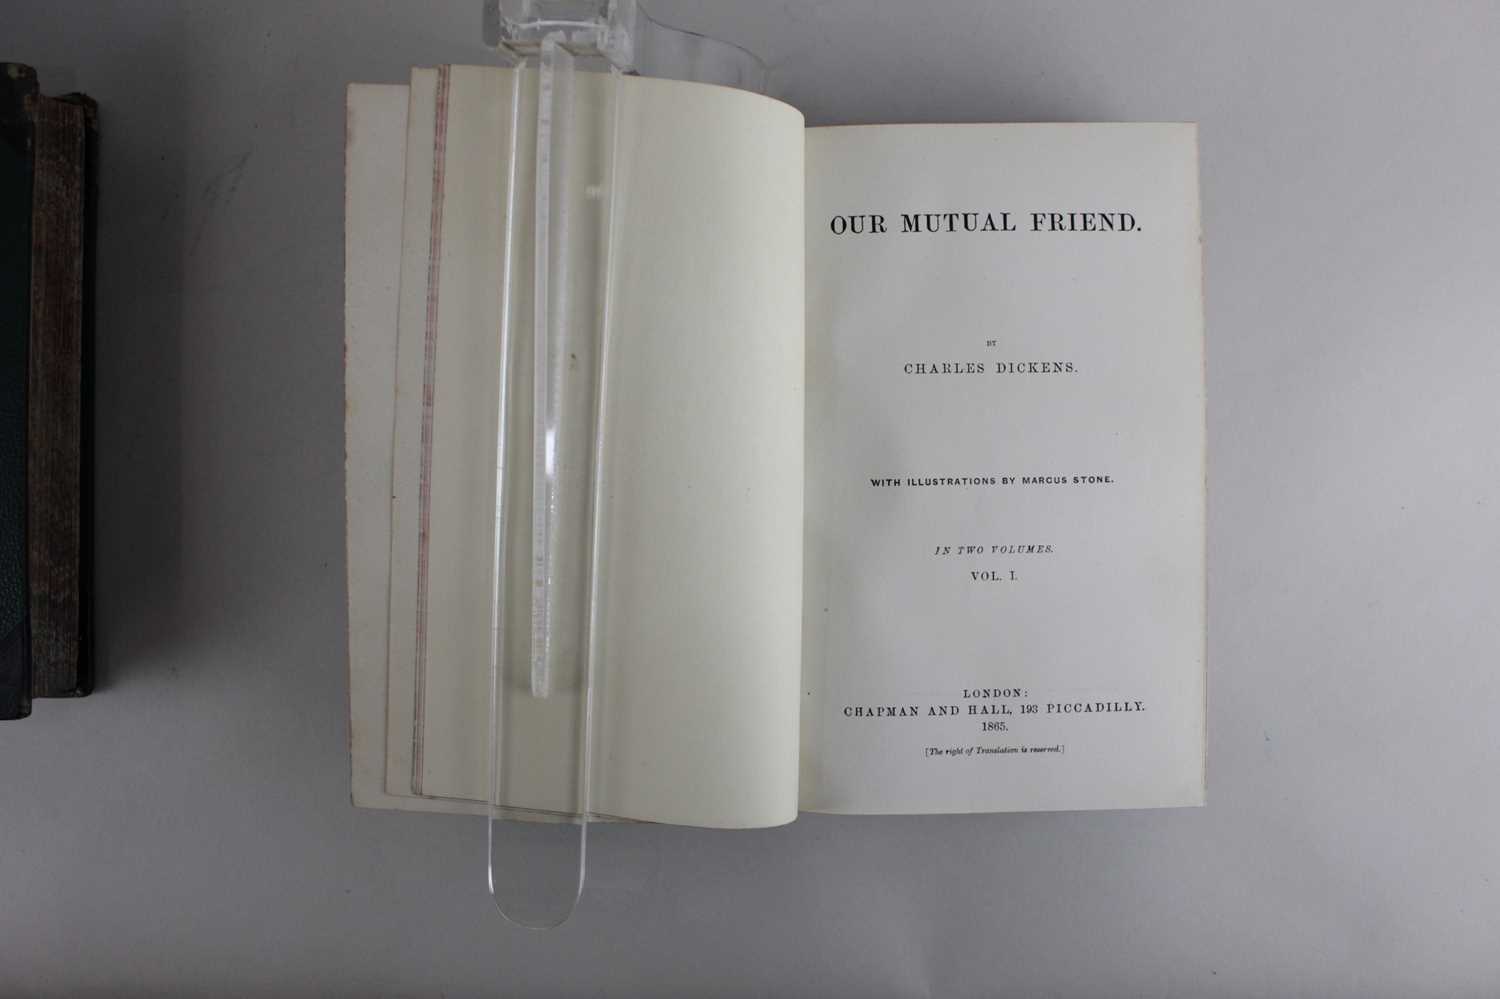 Charles Dickens, seven early volumes including Bleak House, Our Mutual Friend, Dombey and Son with - Image 5 of 5